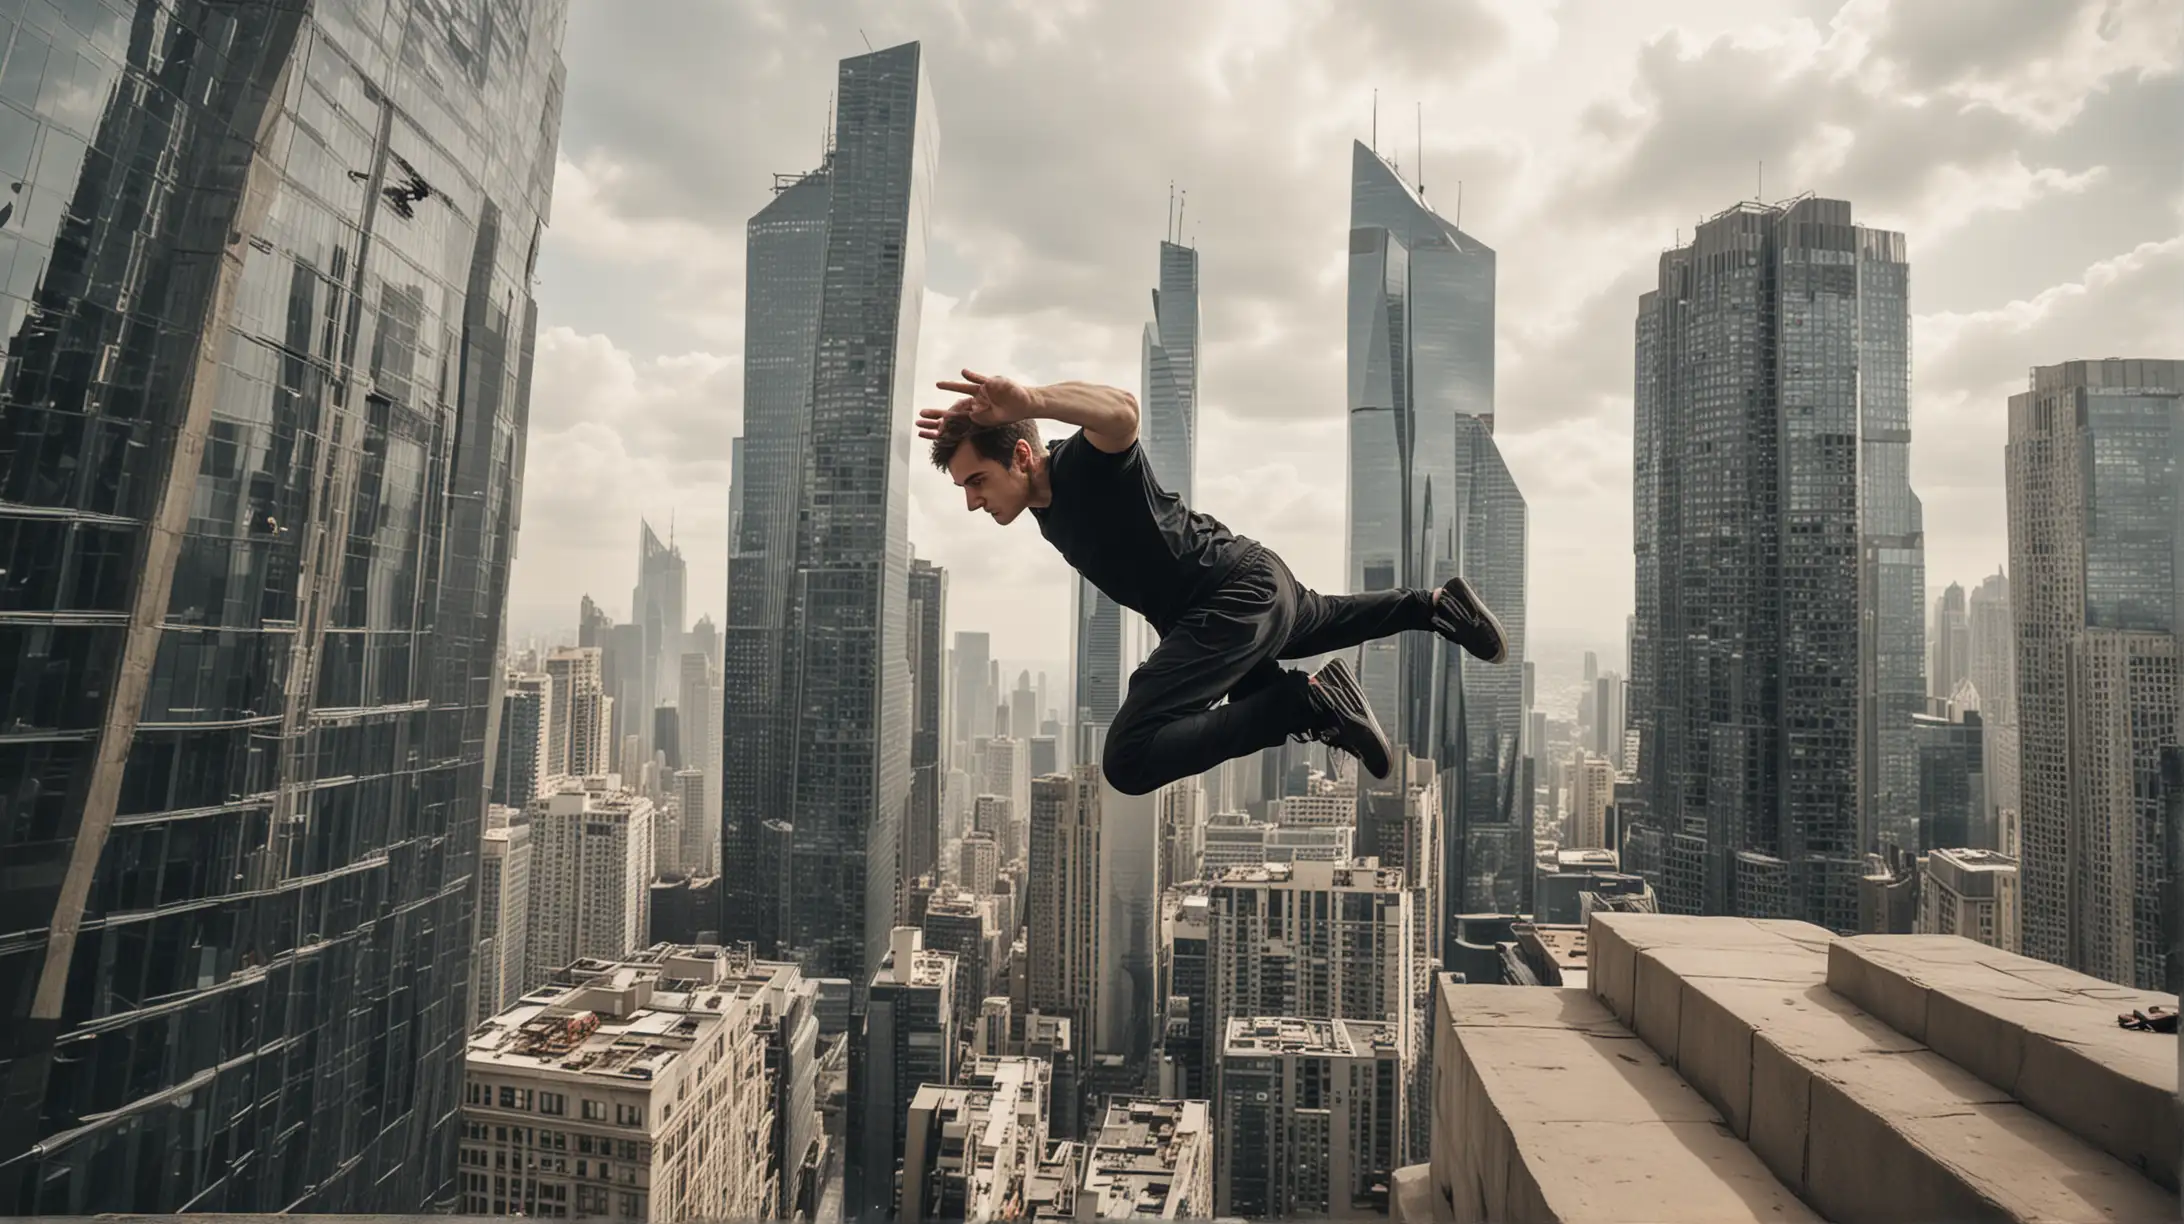 Urban Parkour Athlete Precision Jumping Between Skyscrapers